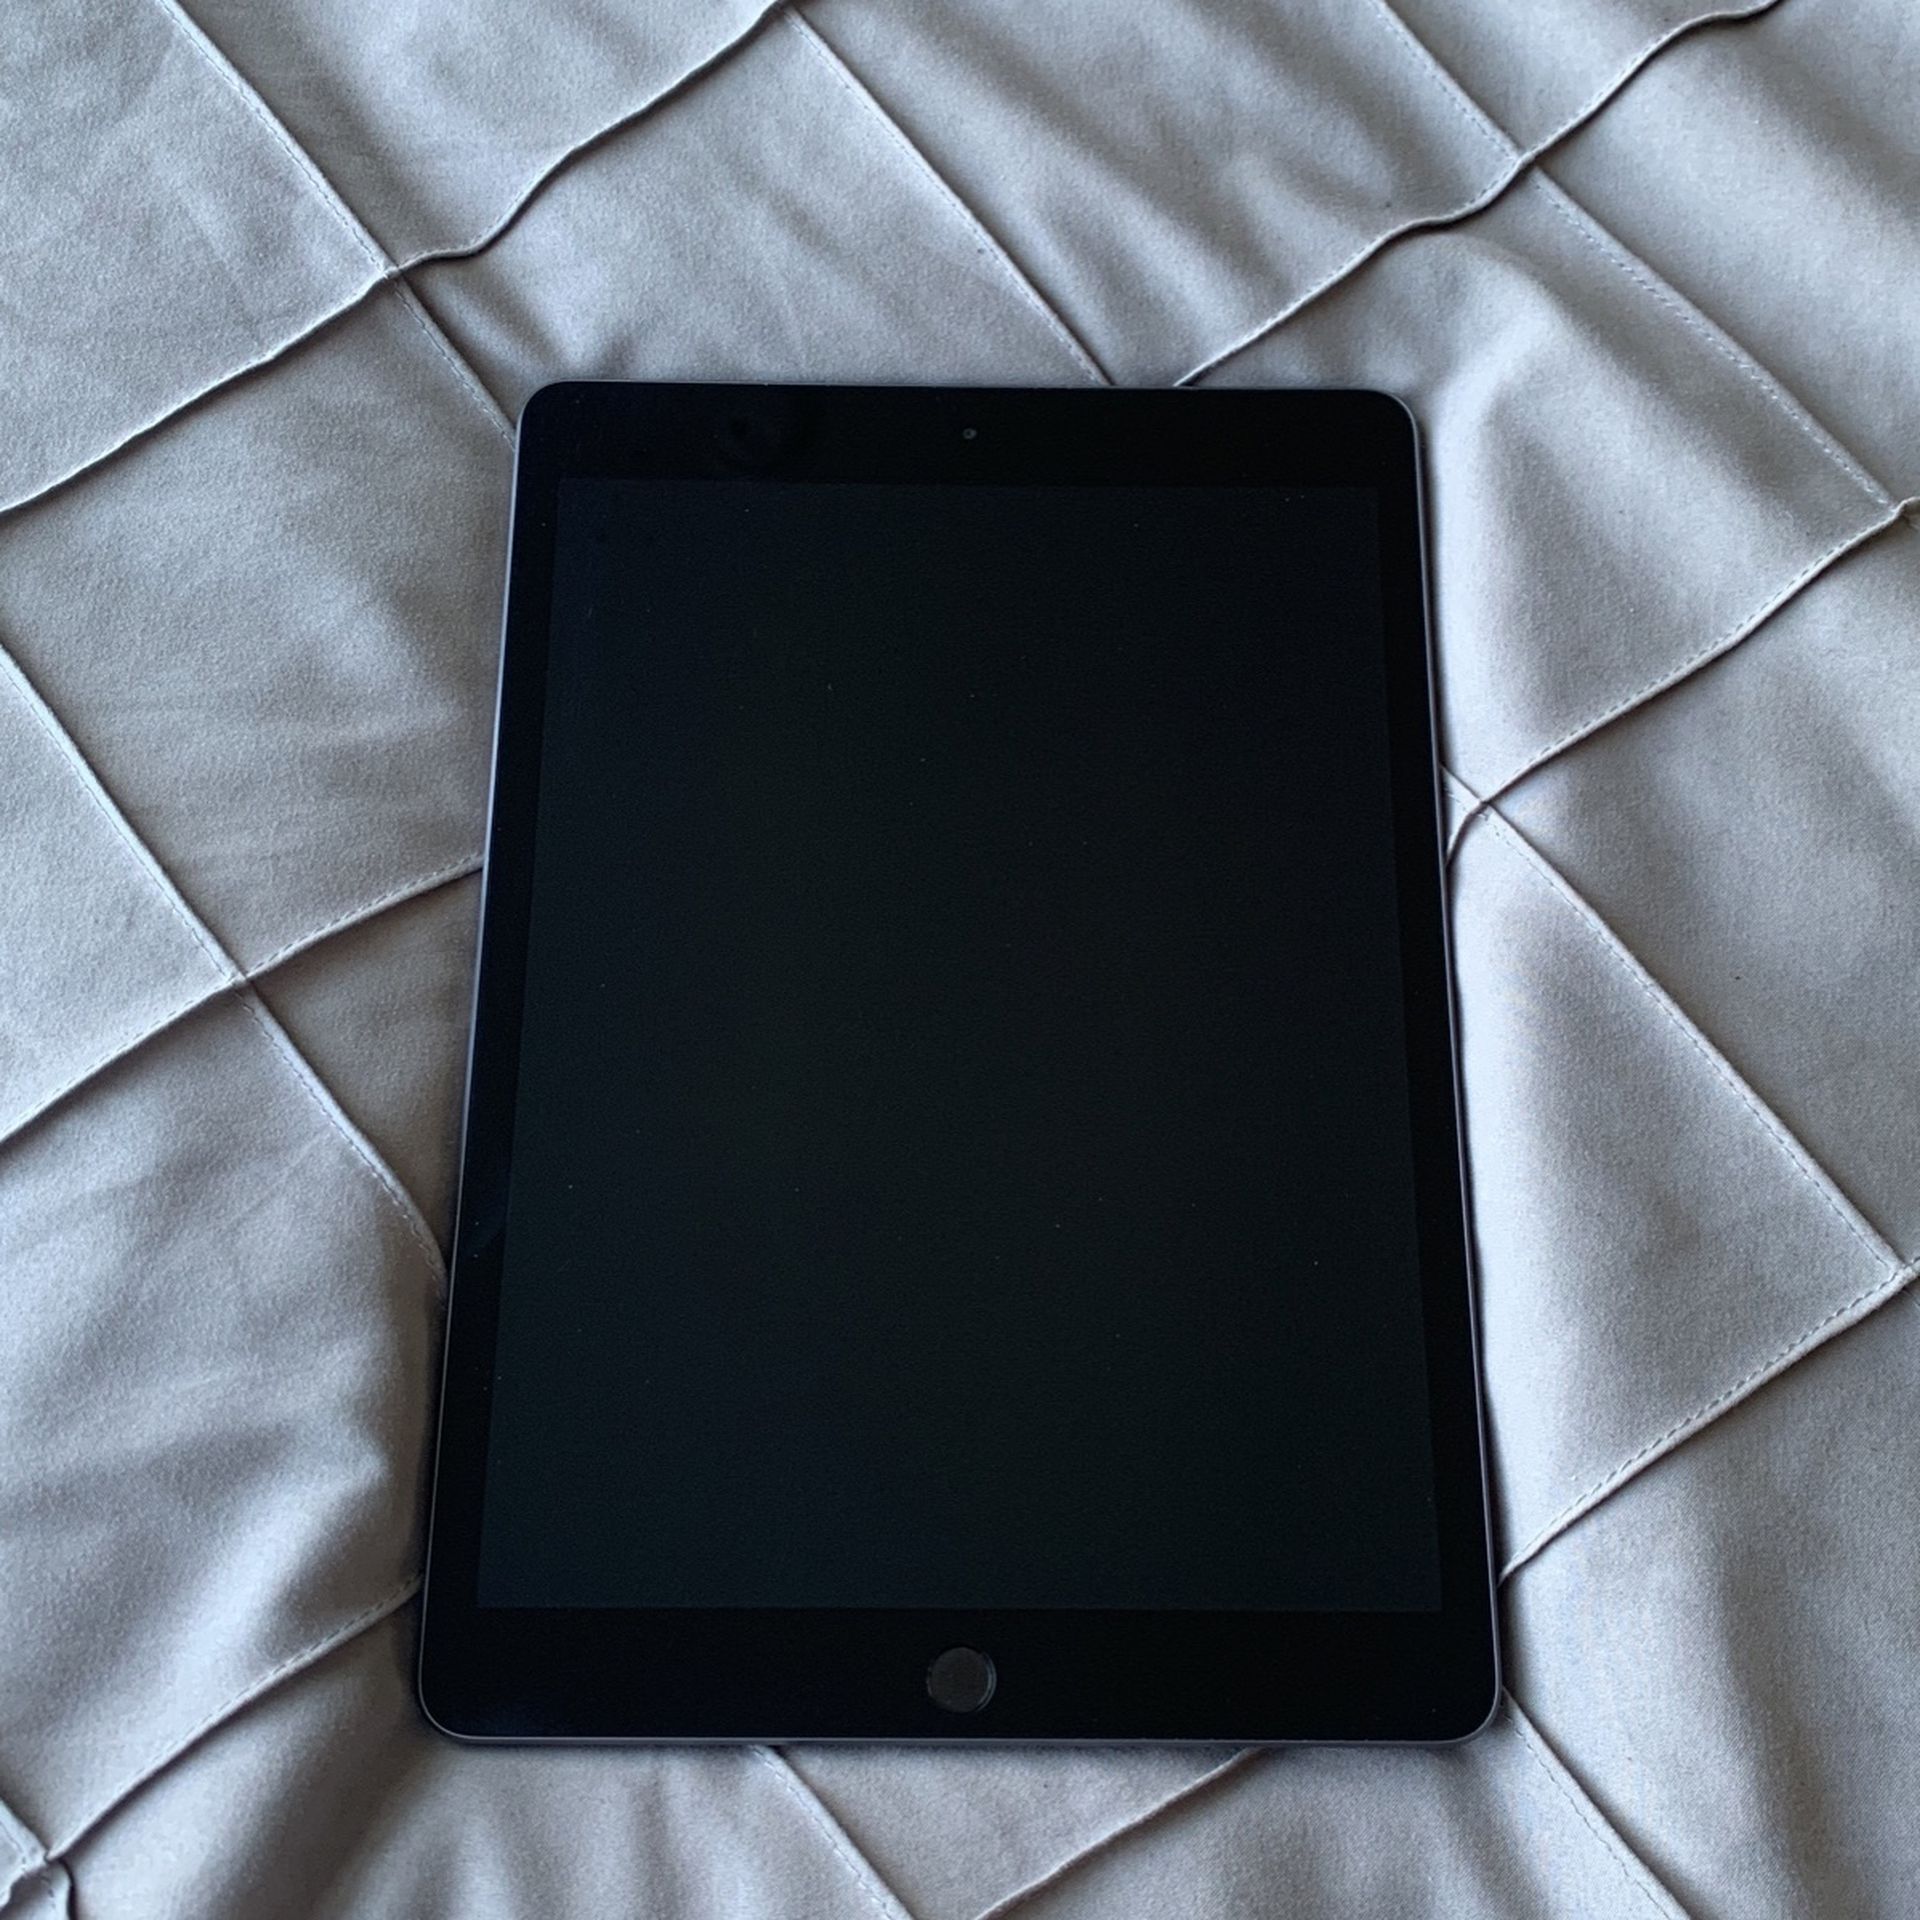 A2197 iPad Forsale, No Scratches Basically Brand New Rarely Used